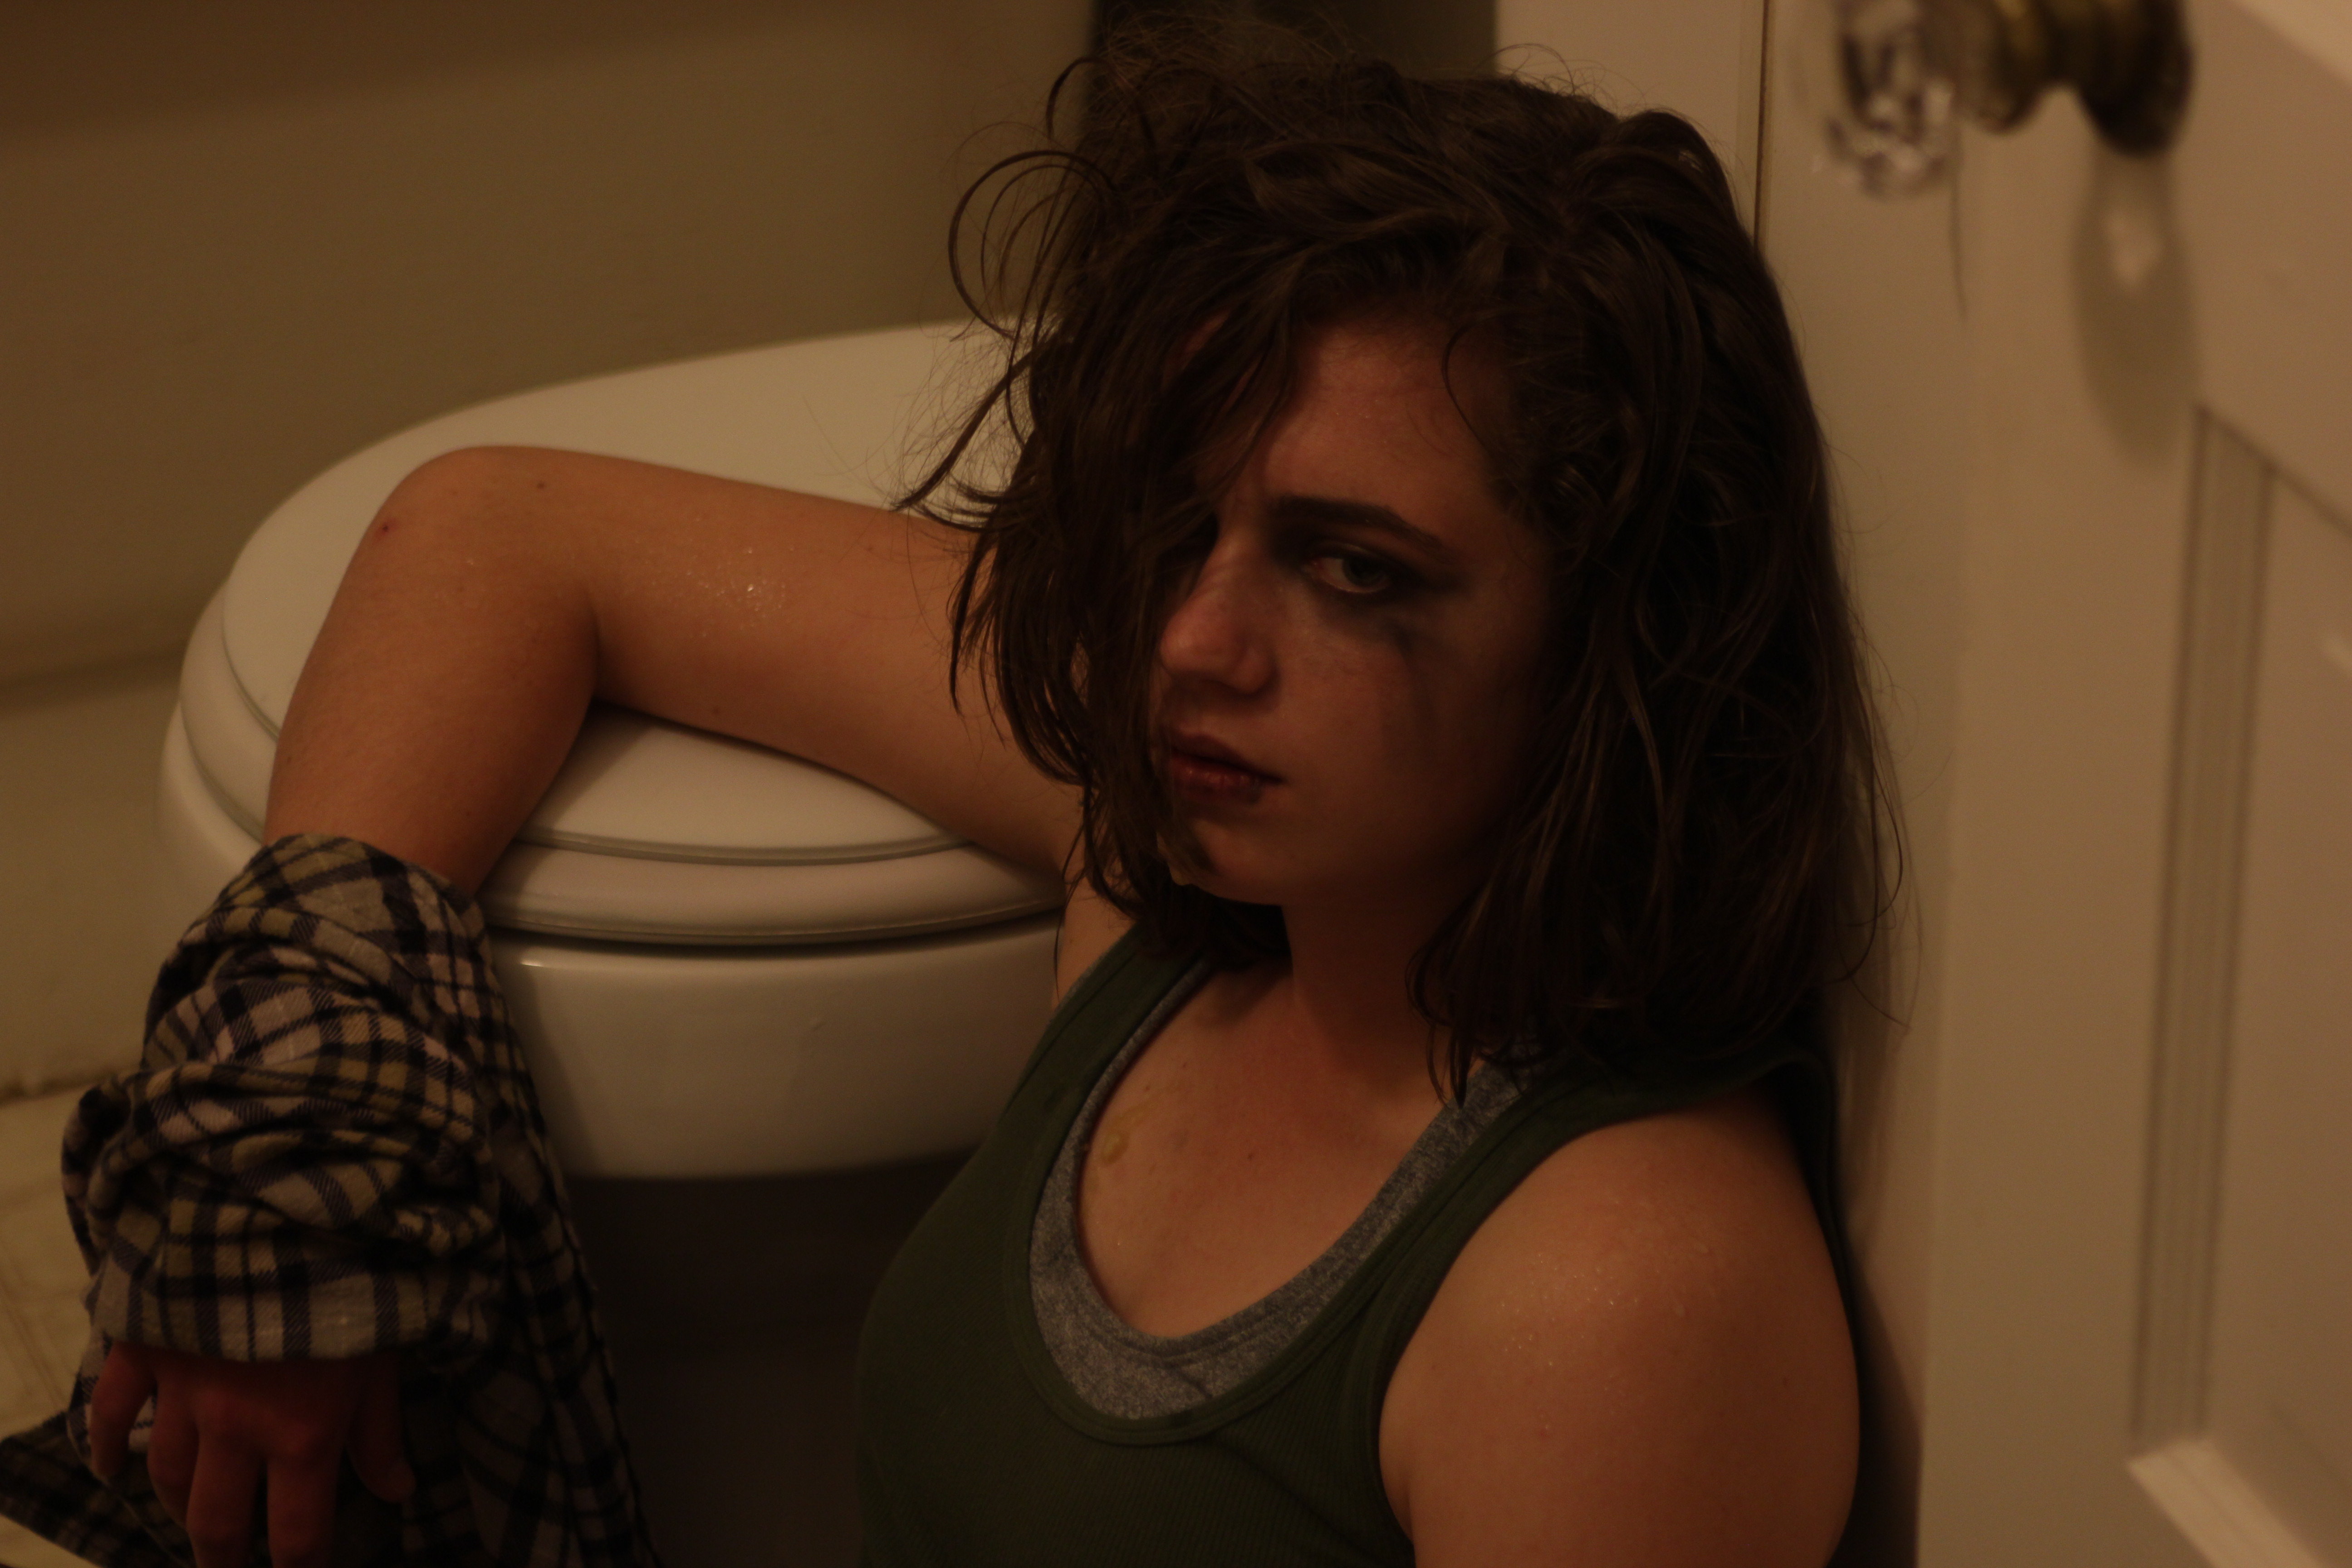 Leigha Sinnott, portrays Tristyn. A troubled teen struggling to adjust after the sudden death of her mother and battling personal demons in PTP Inc's teen drama 